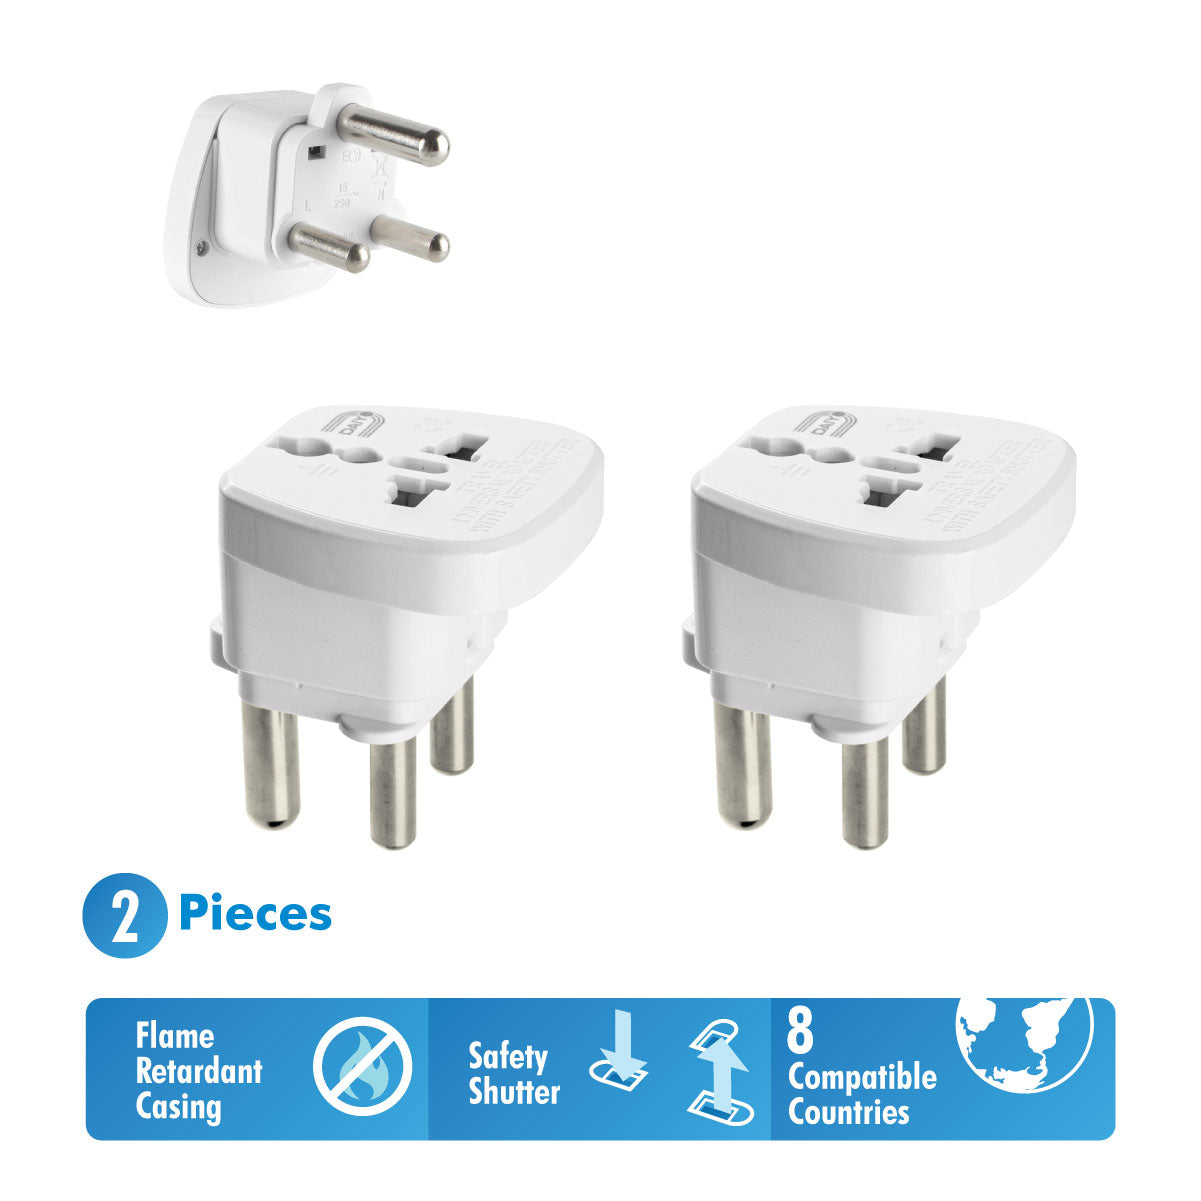 Traveller Adaptor South African 3 Prong With Earth X 2 Pieces | Botswana, India, Lesotho, Mozambique, Namibia, Nepal